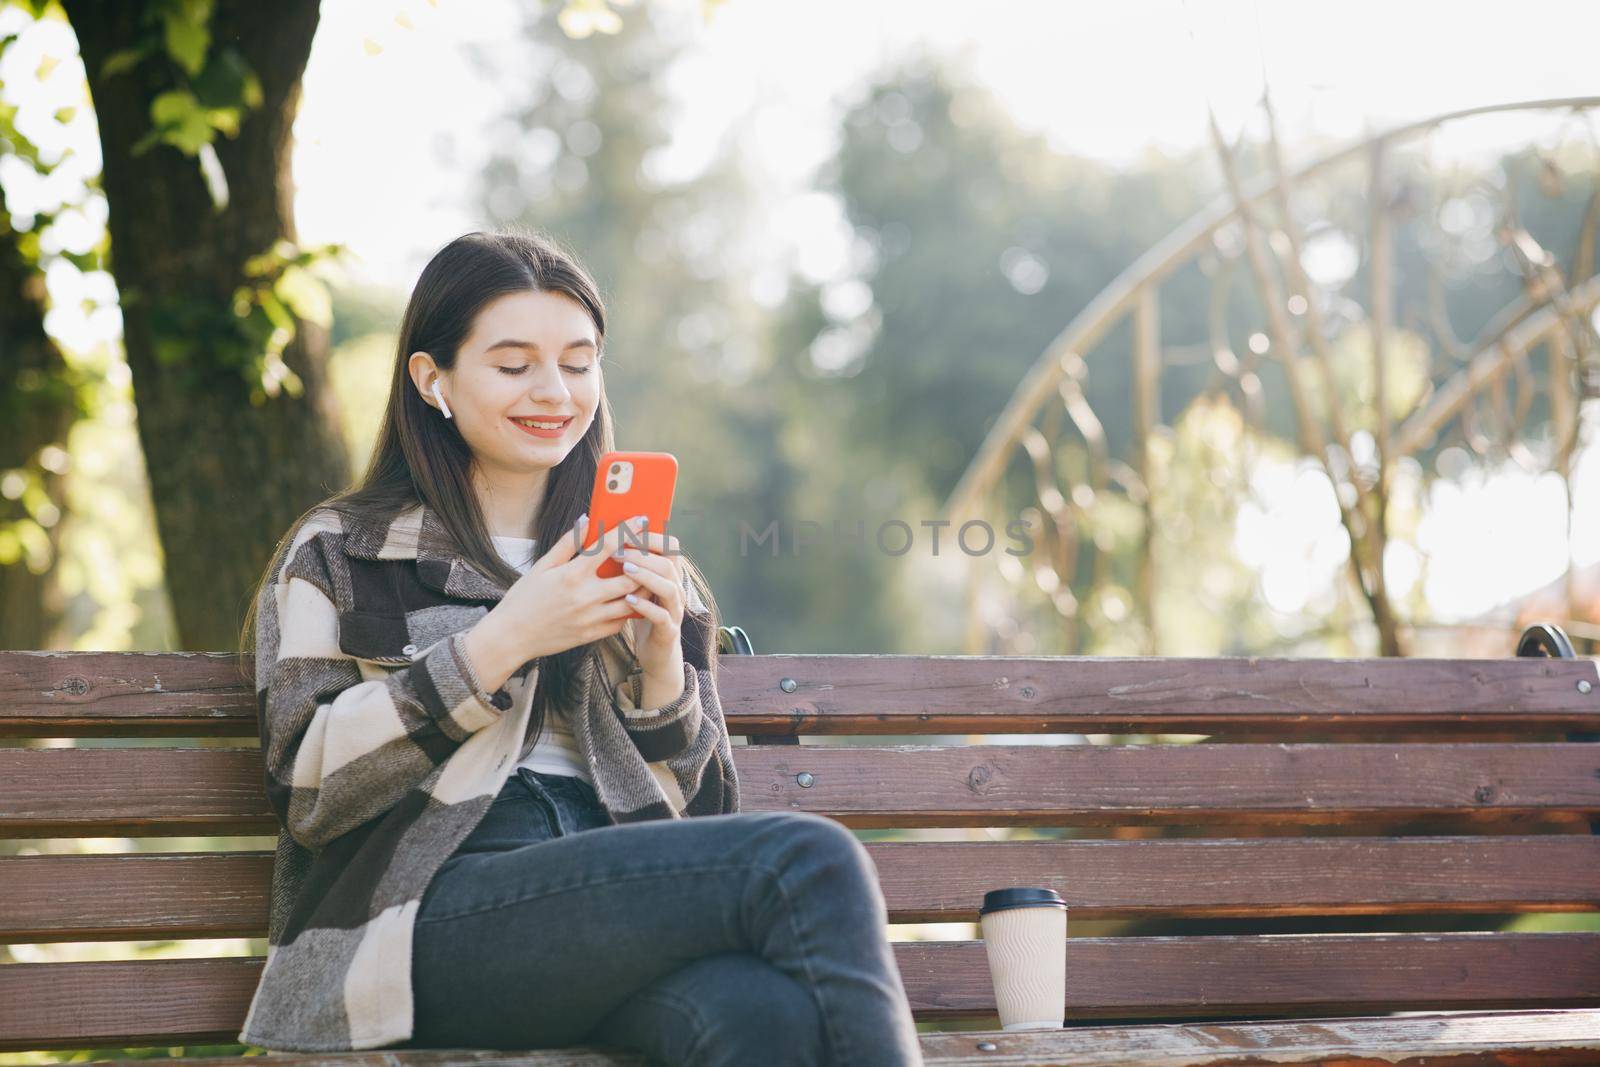 Portrait of girl wearing earphones and using smartphone listening music. Attractive woman browsing on mobile phone in park. City, urban background.